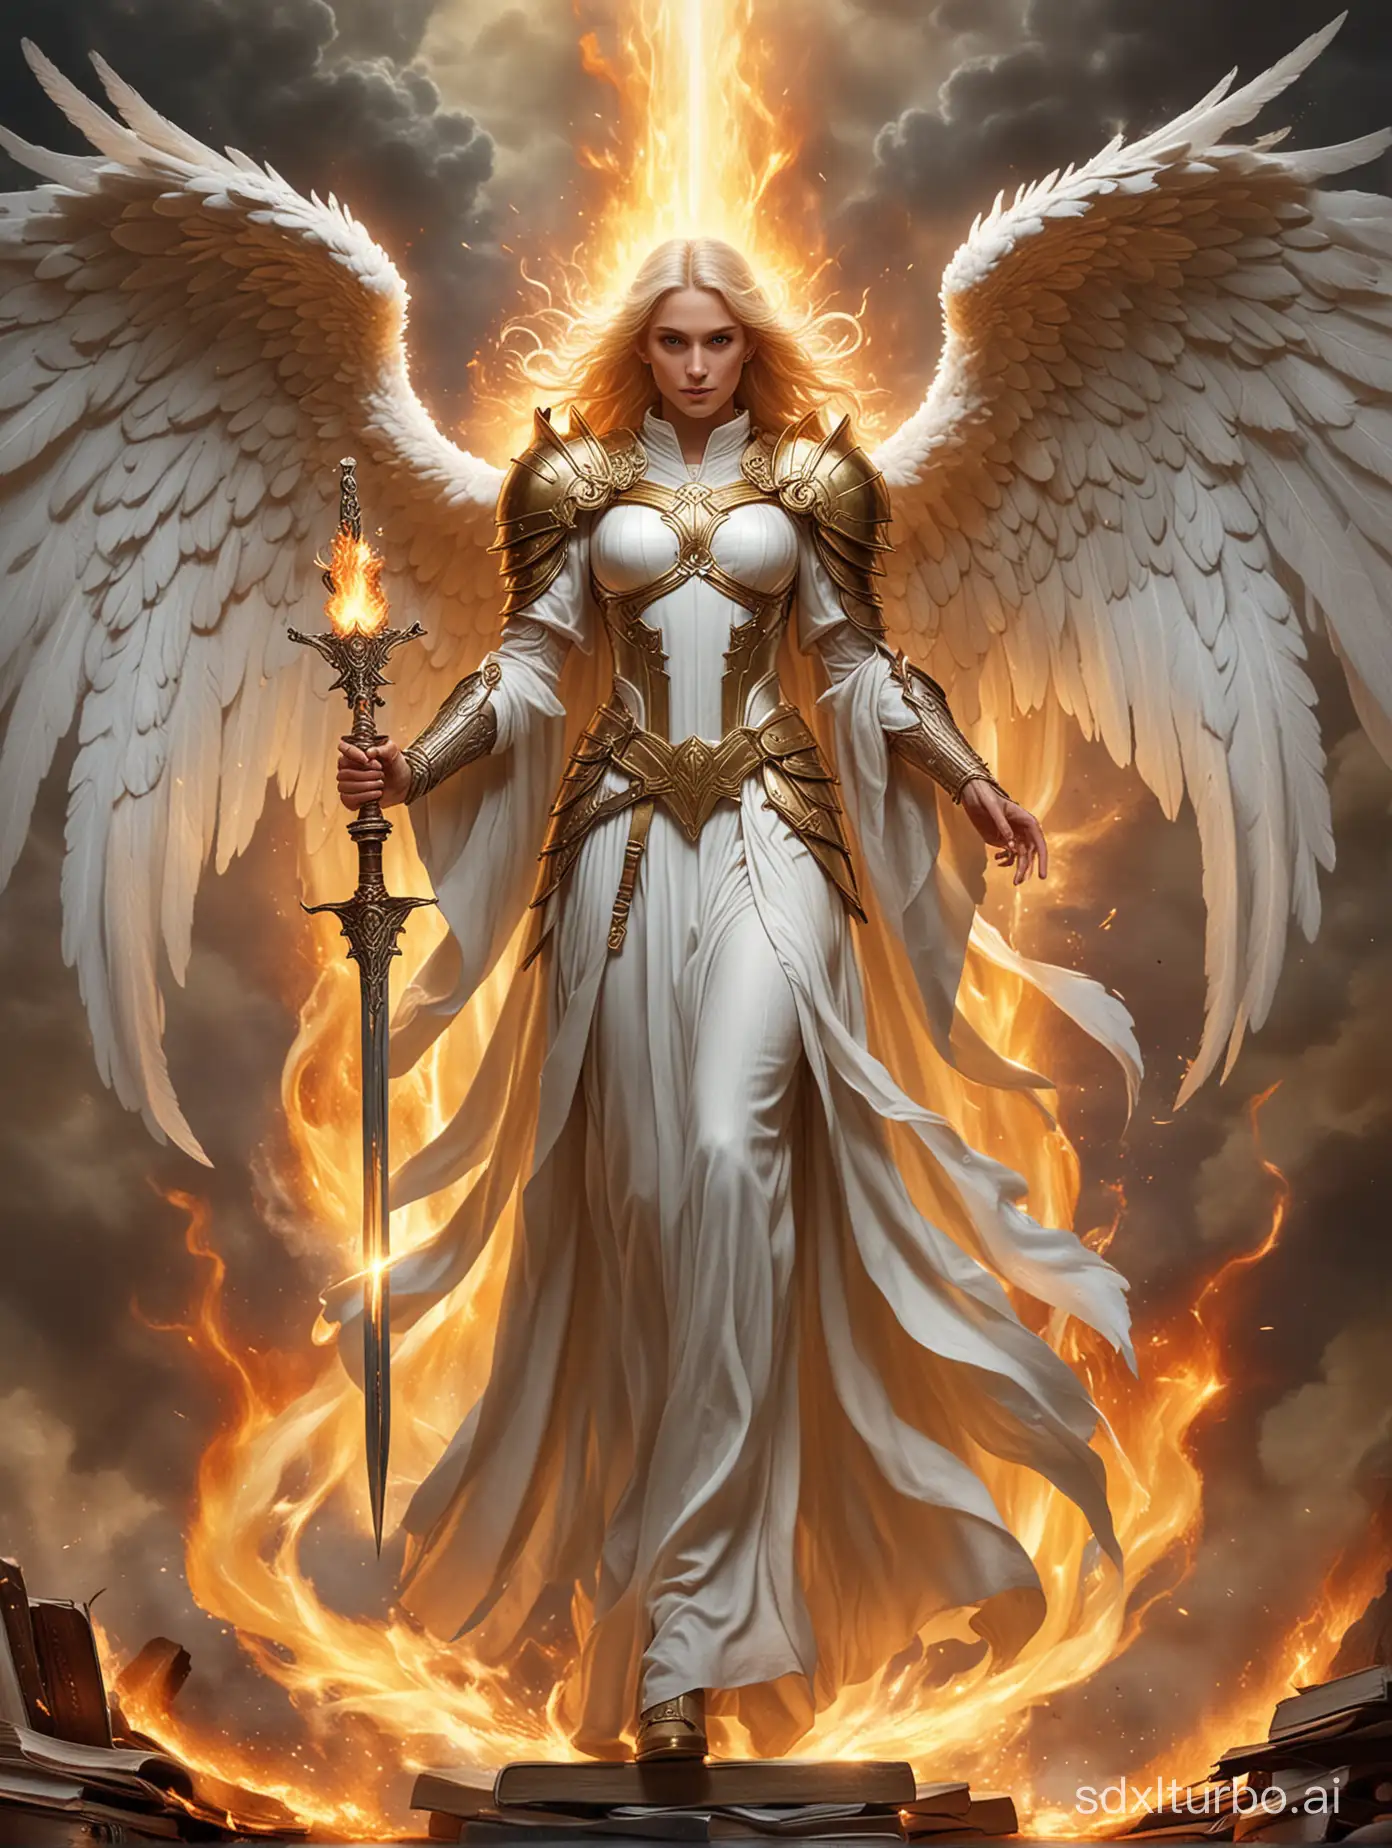 The Archangel Uriel has a book in her right hand and a flaming sword in her left, with large white wings on her back.